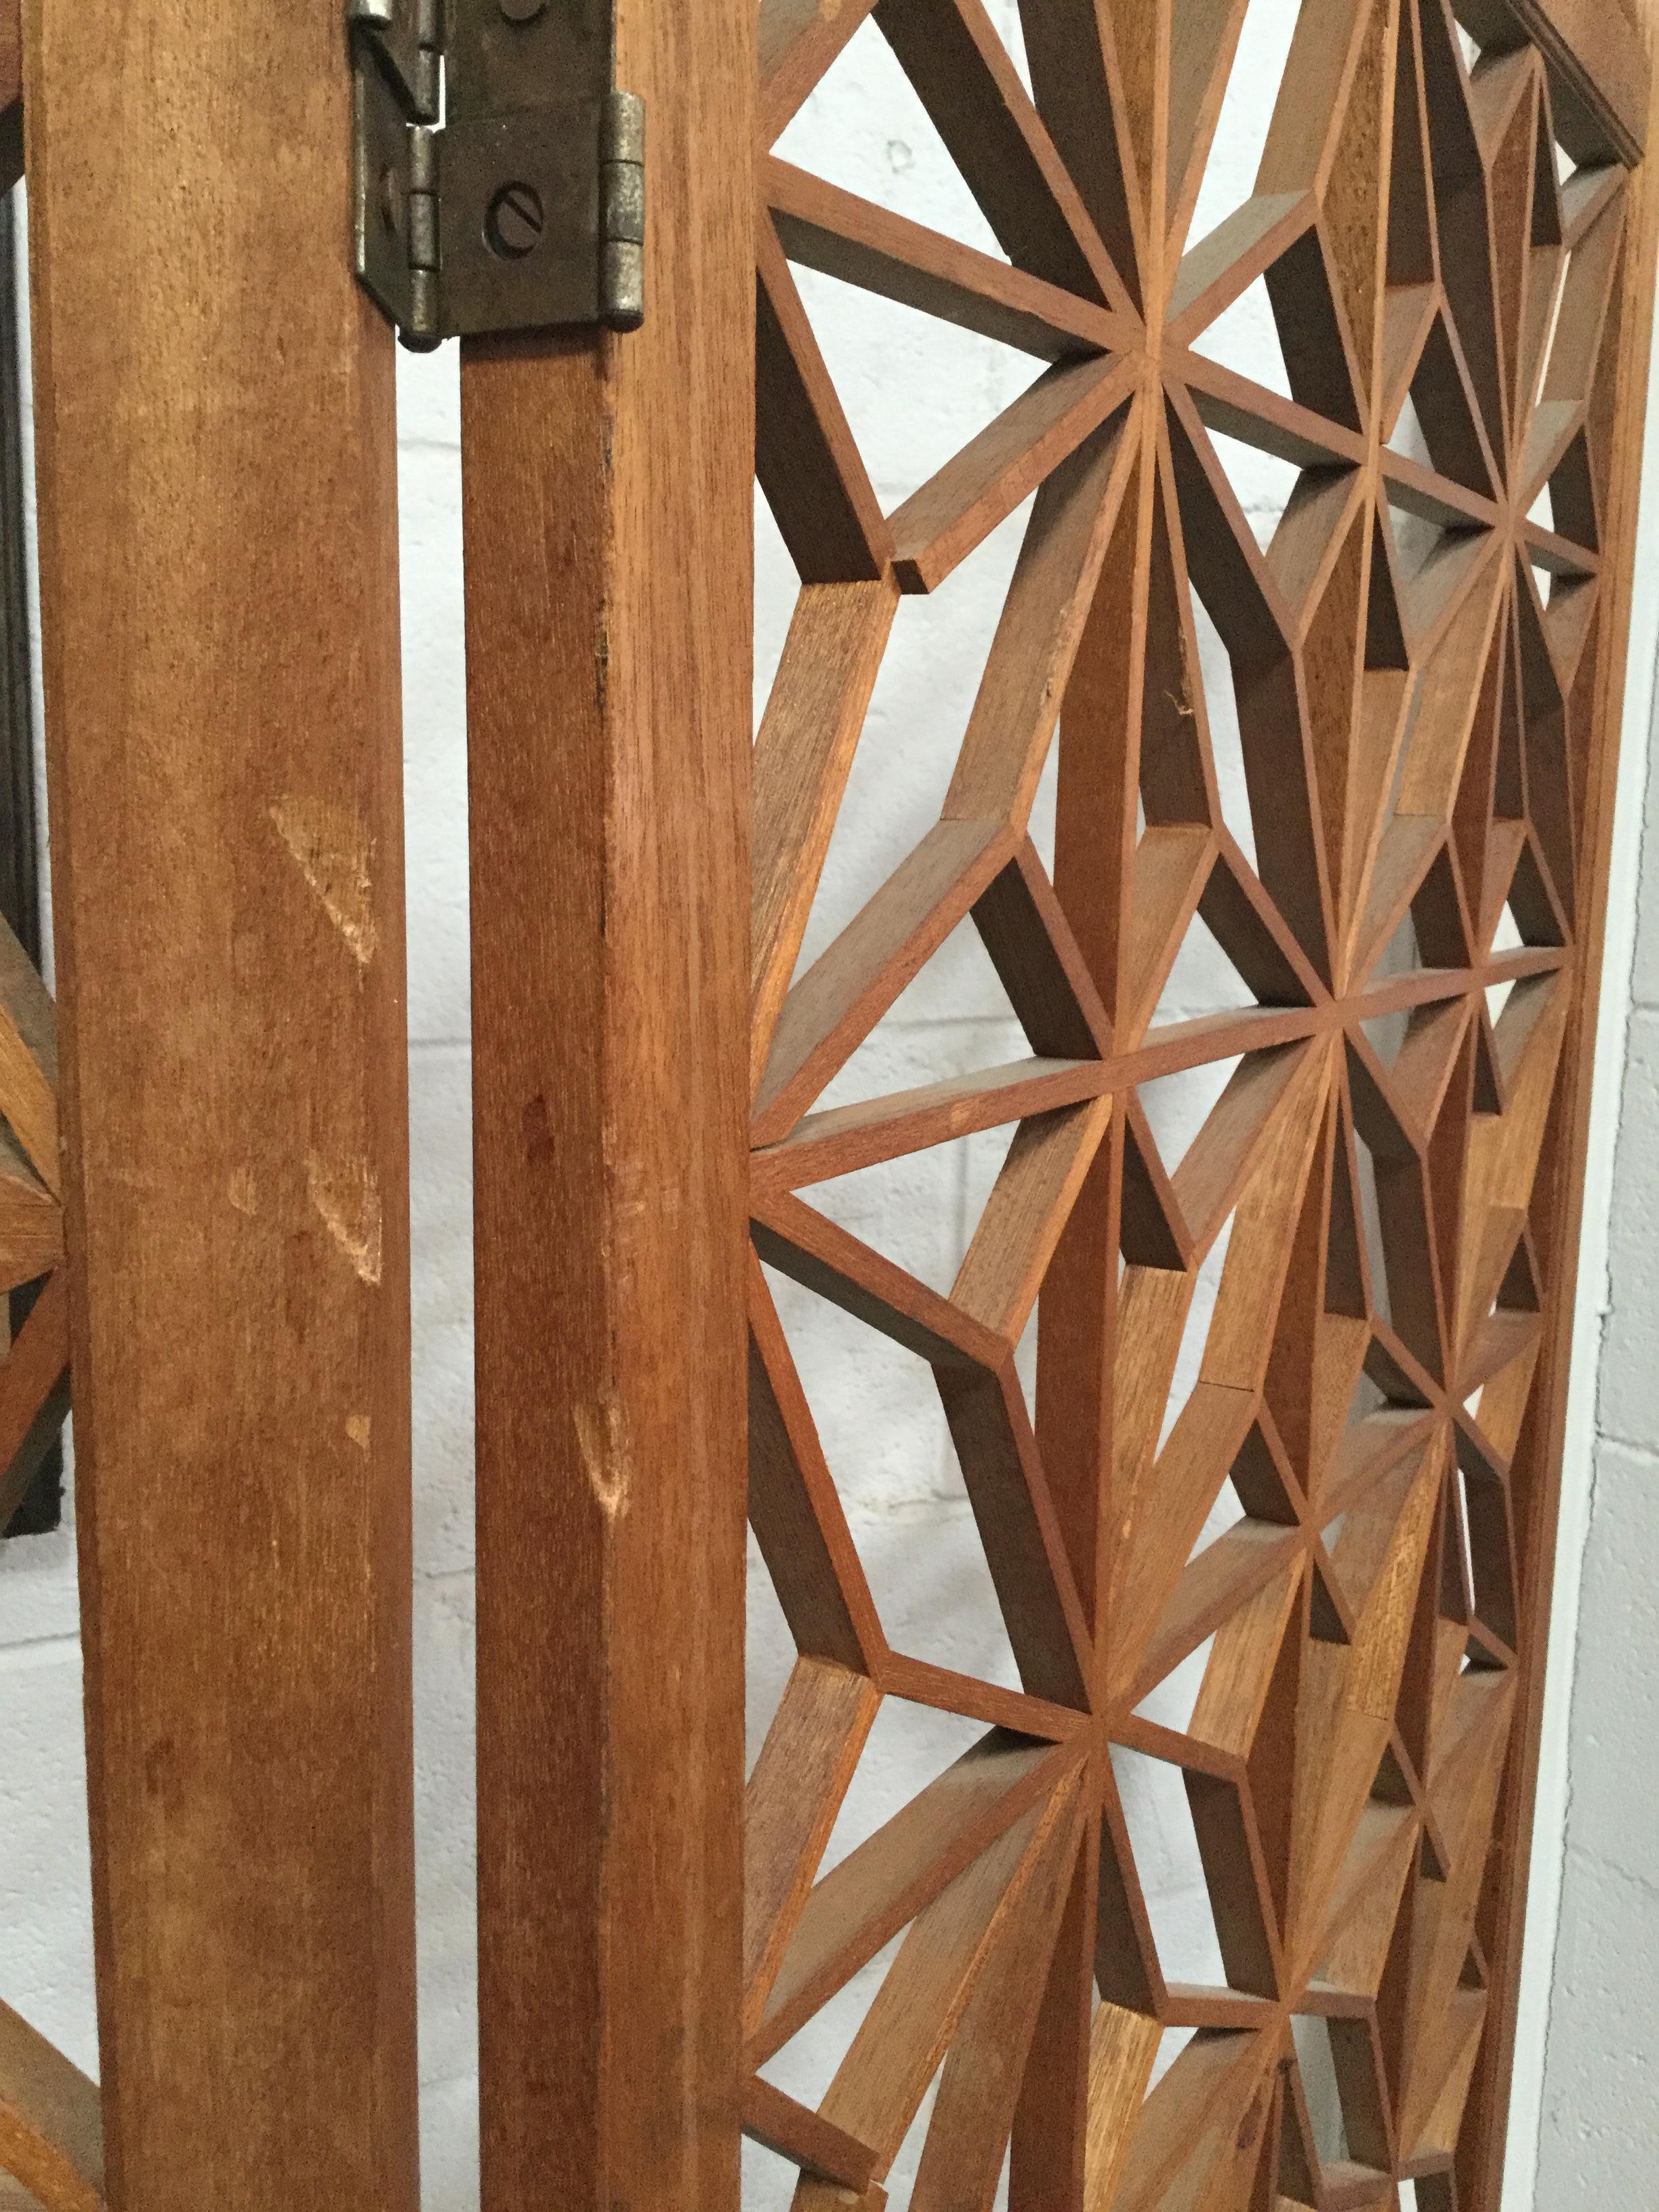 Mid-20th Century Midcentury Teak Cut-Out Room Divider / Screen